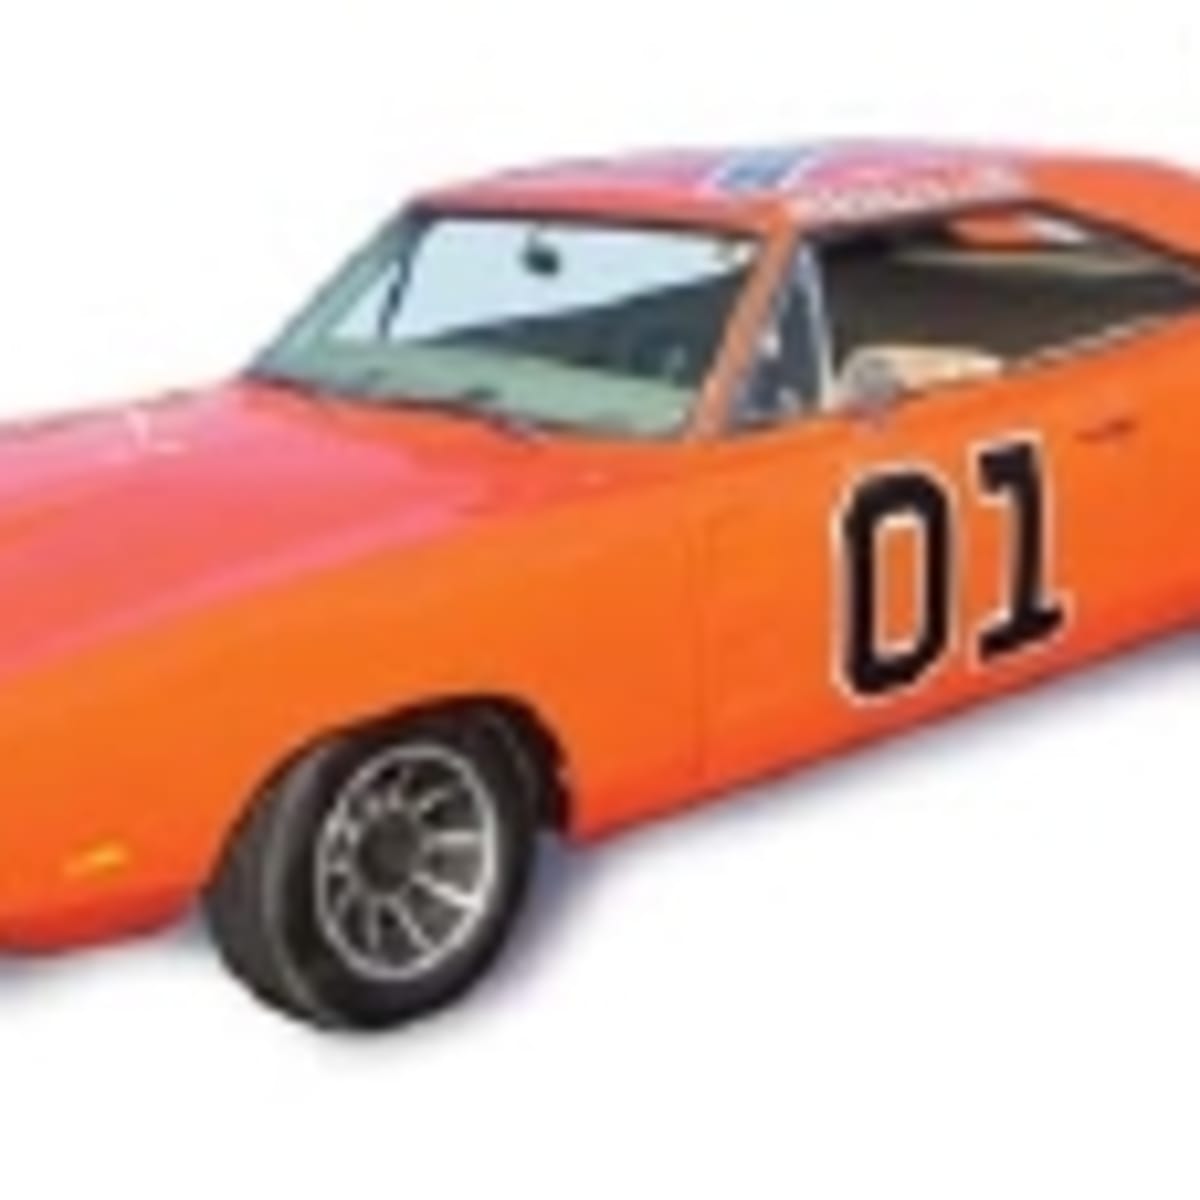 Yee-Haw! Car buffs star-struck by 'The General Lee' - Old Cars Weekly